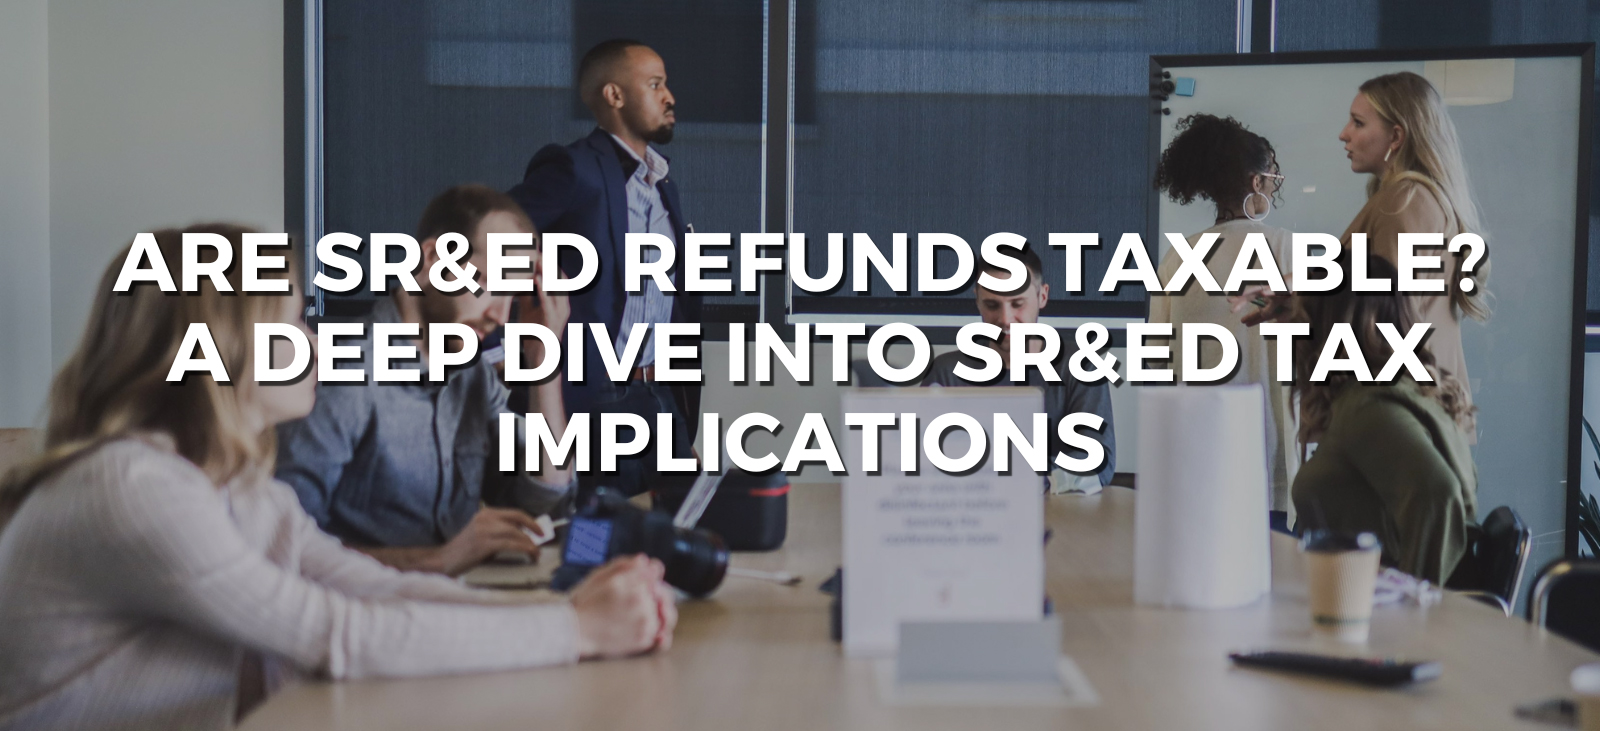 Are SR&ED Refunds Taxable? A Deep Dive Into SR&ED Tax Implications